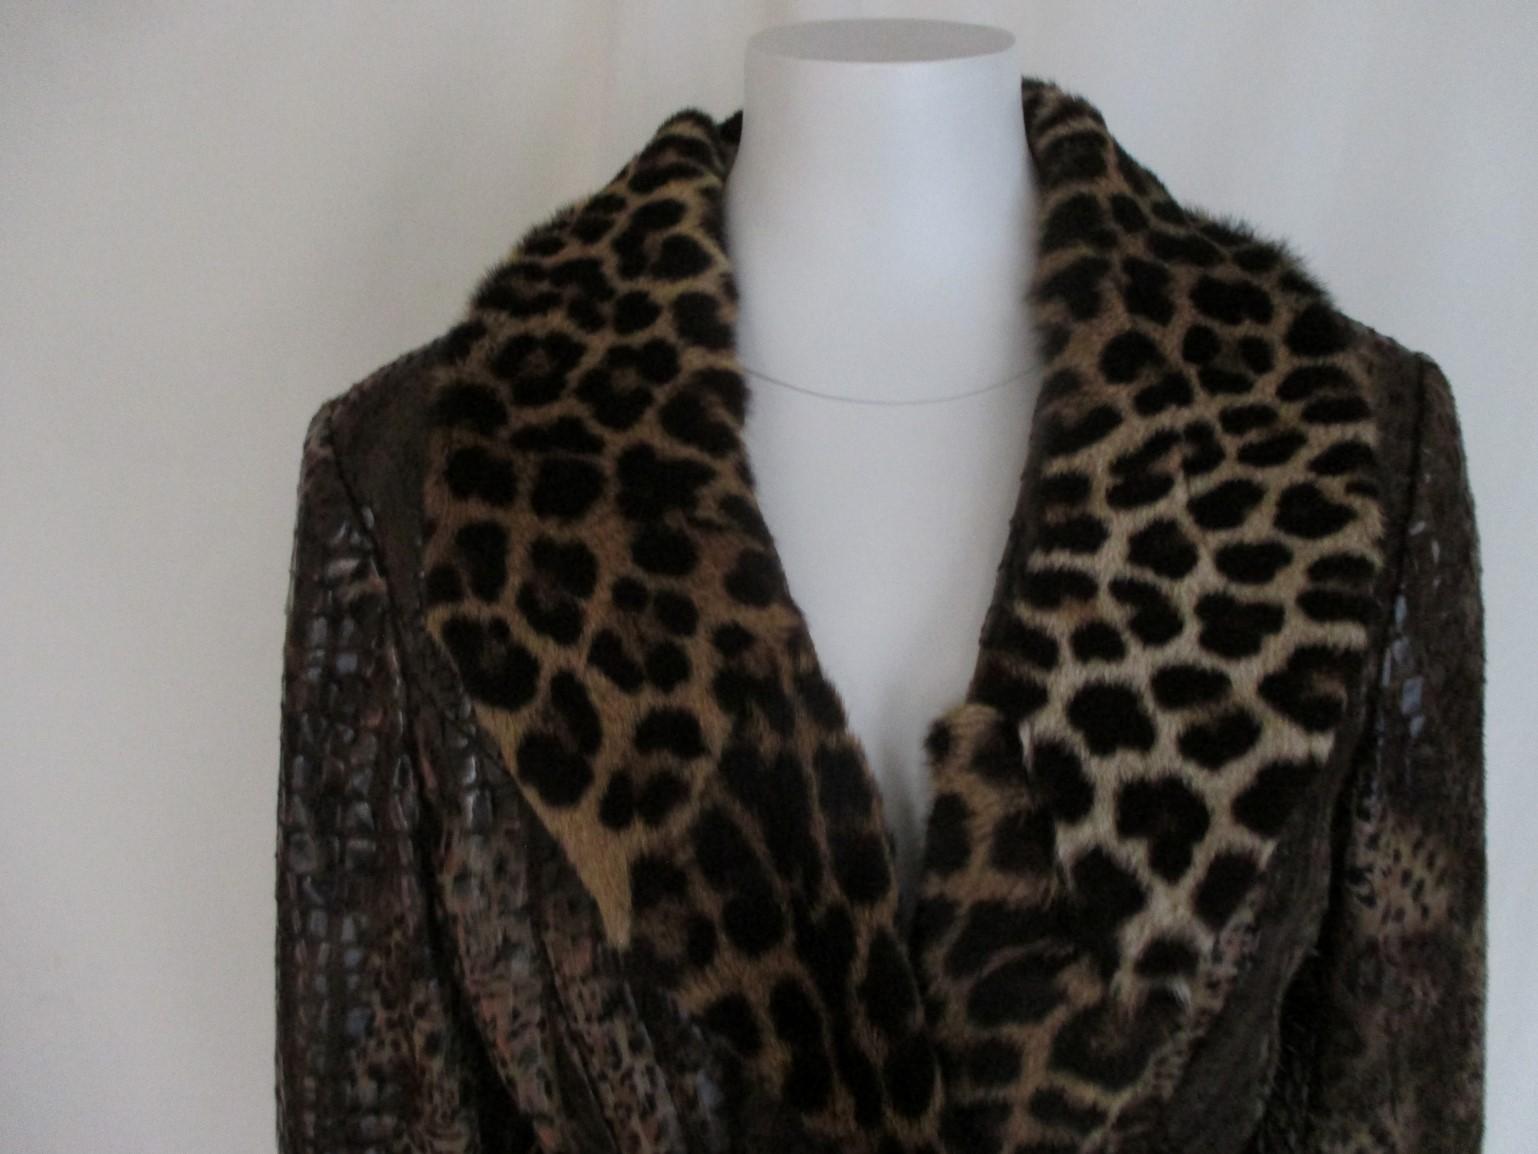 Vintage patent printed fabric leopard style jacket with fur details.
Closes with 3 buttons, has a belt and not open pockets.
Size fits like medium US 10-12/ EU 40-42, see section measurements.

Please note that vintage items are not new and